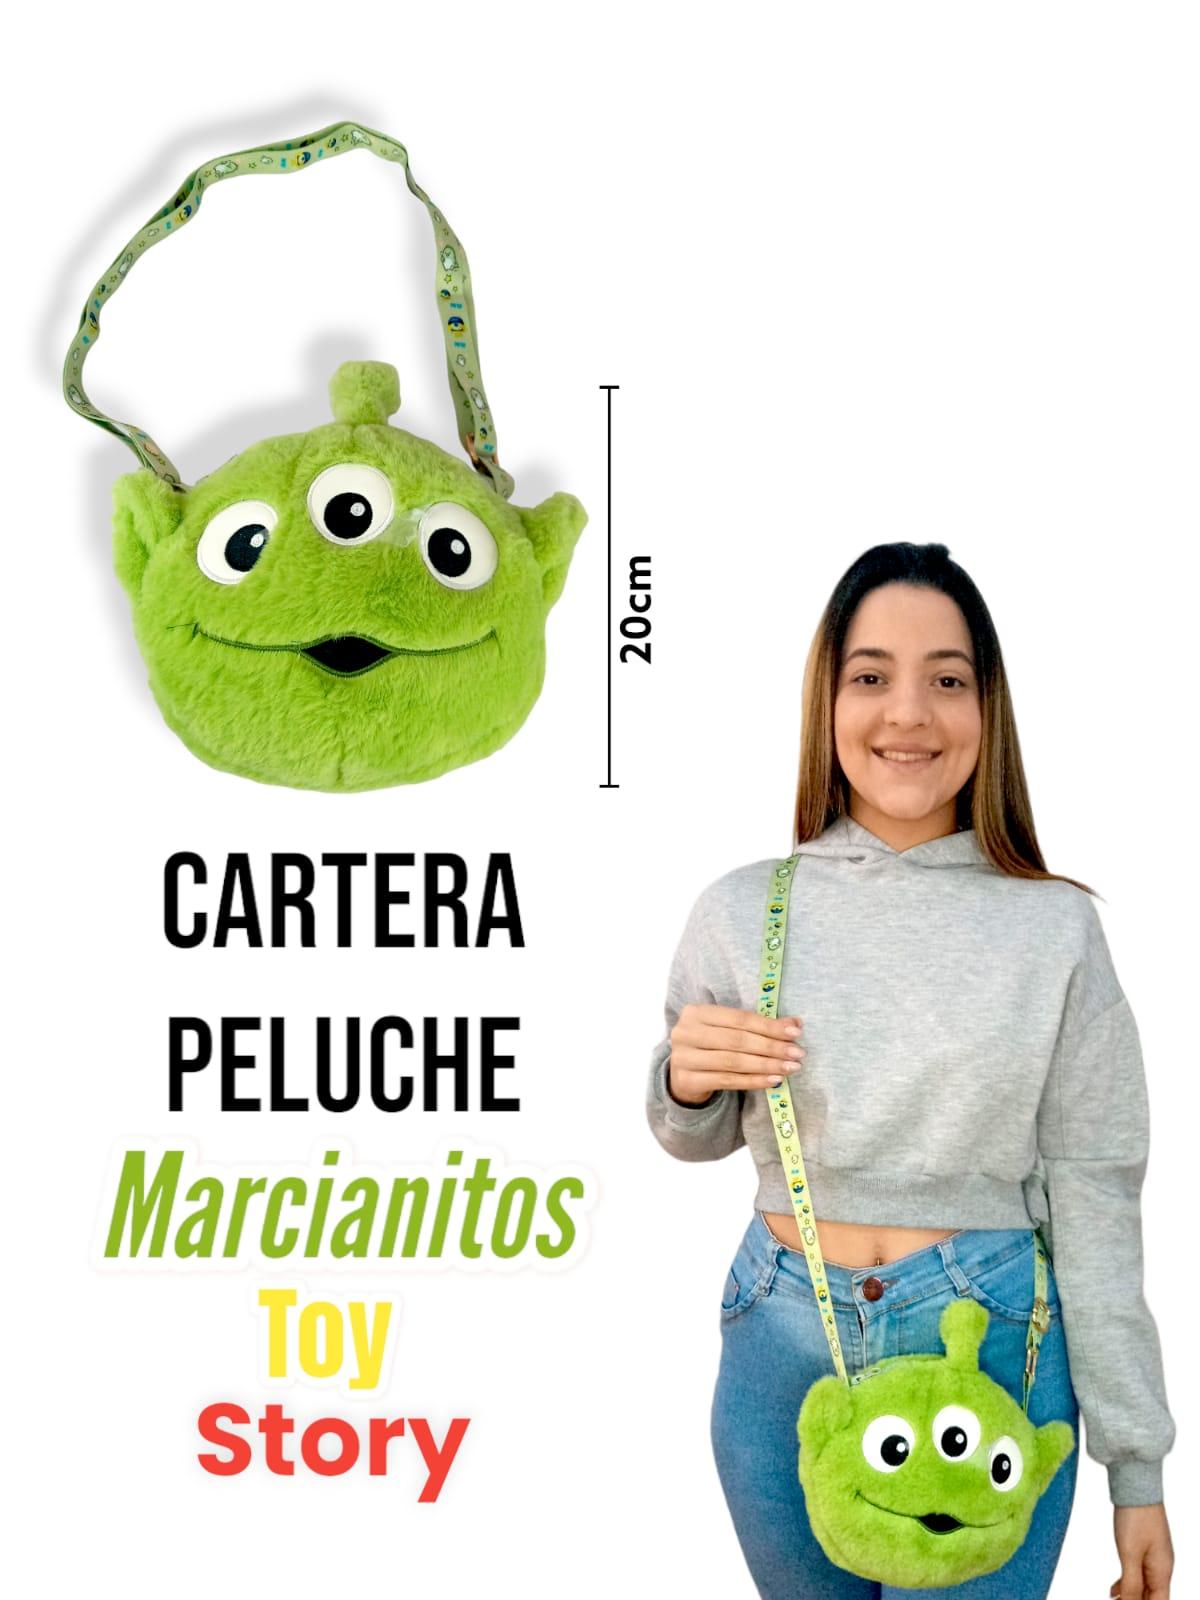 Cartera Peluche Marcianitos Toy Story